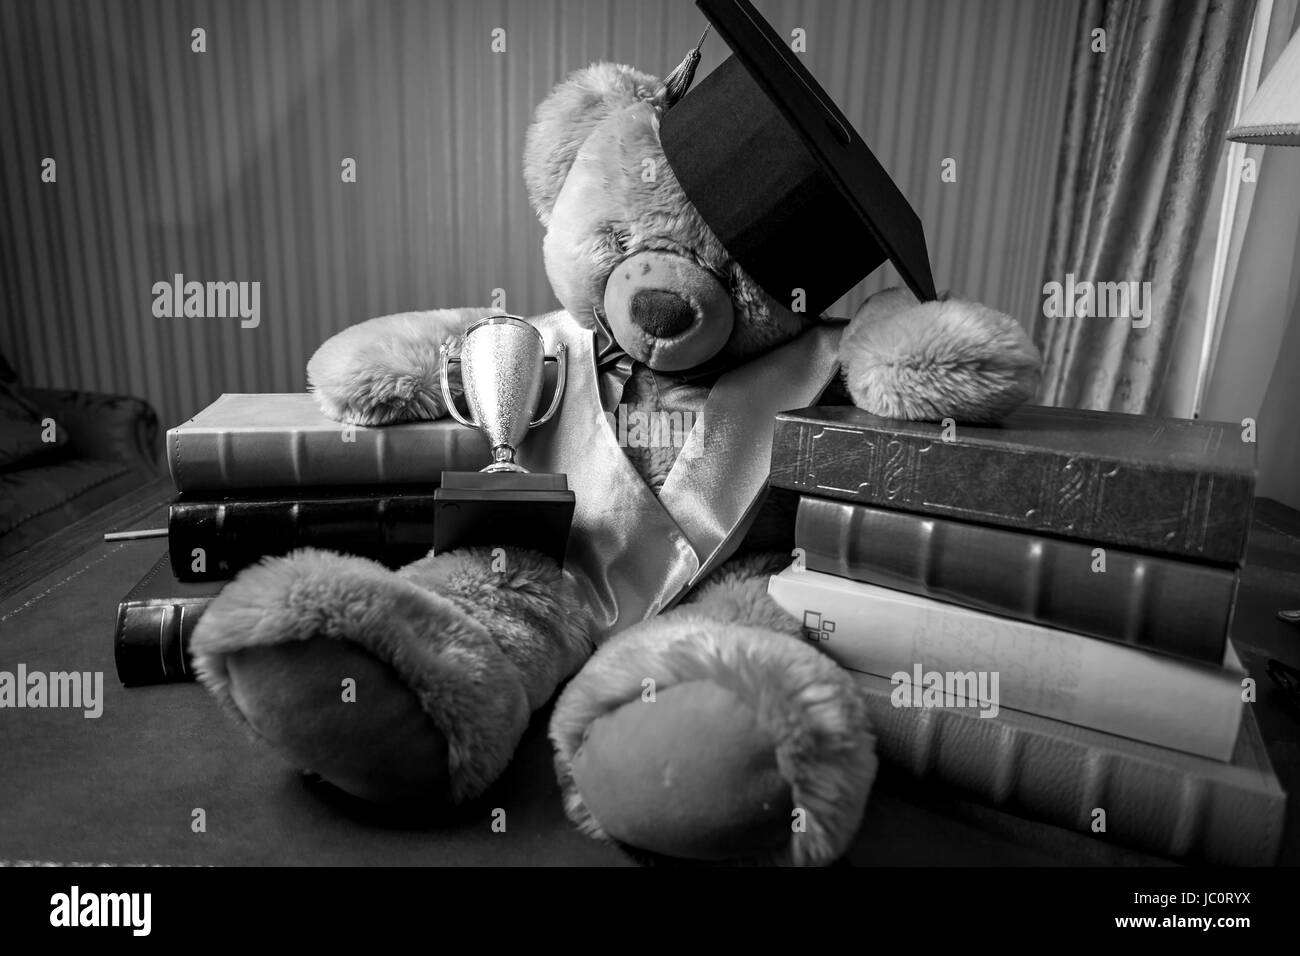 Black and white photo of teddy bear in graduation hat sitting on table Stock Photo